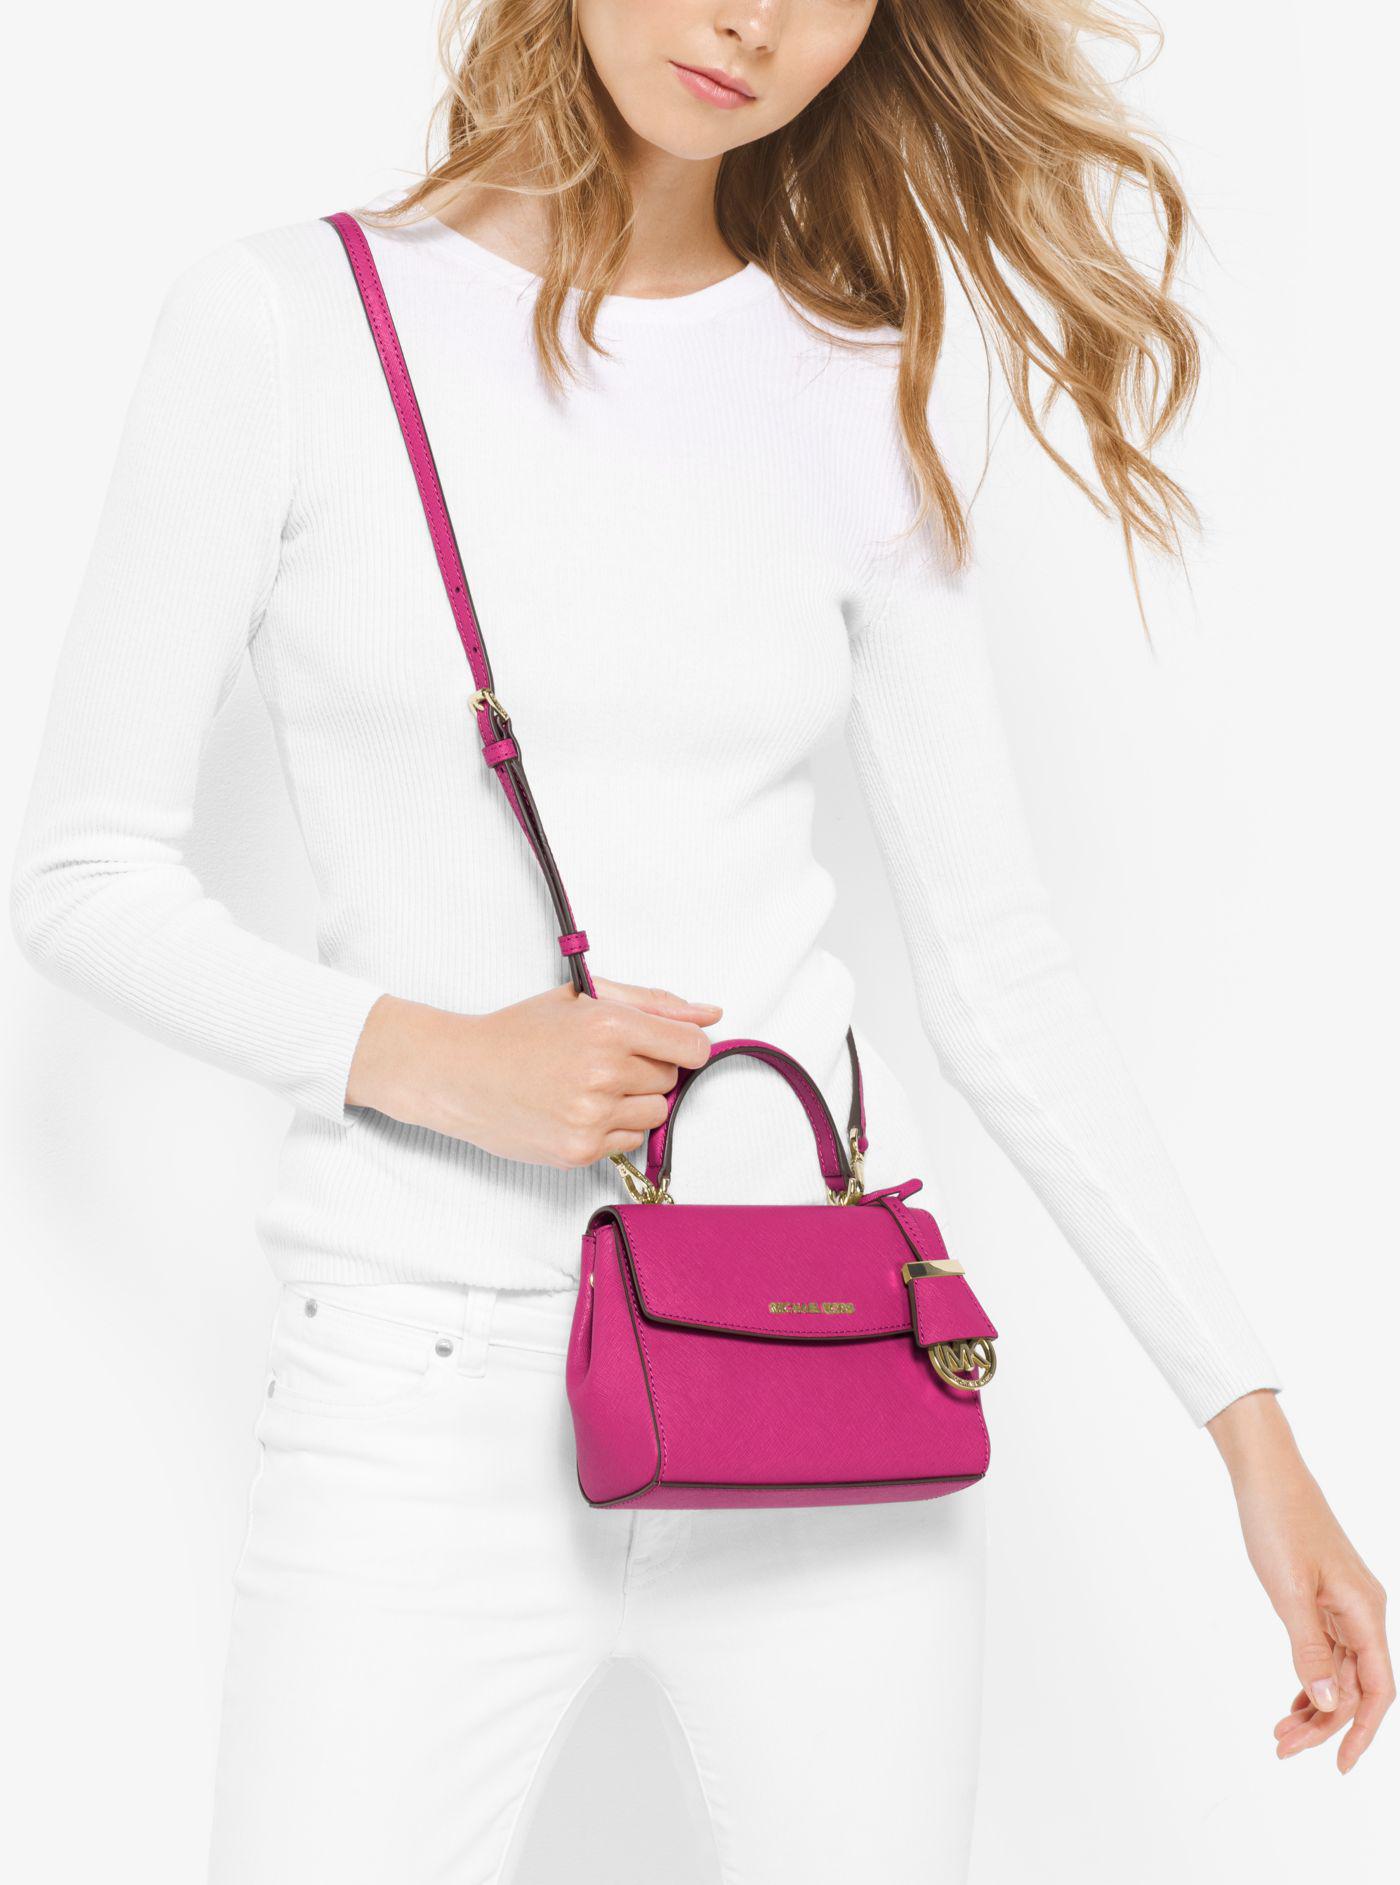 Michael Kors Ava Extra-small Saffiano Leather Crossbody in Raspberry (Pink) Lyst